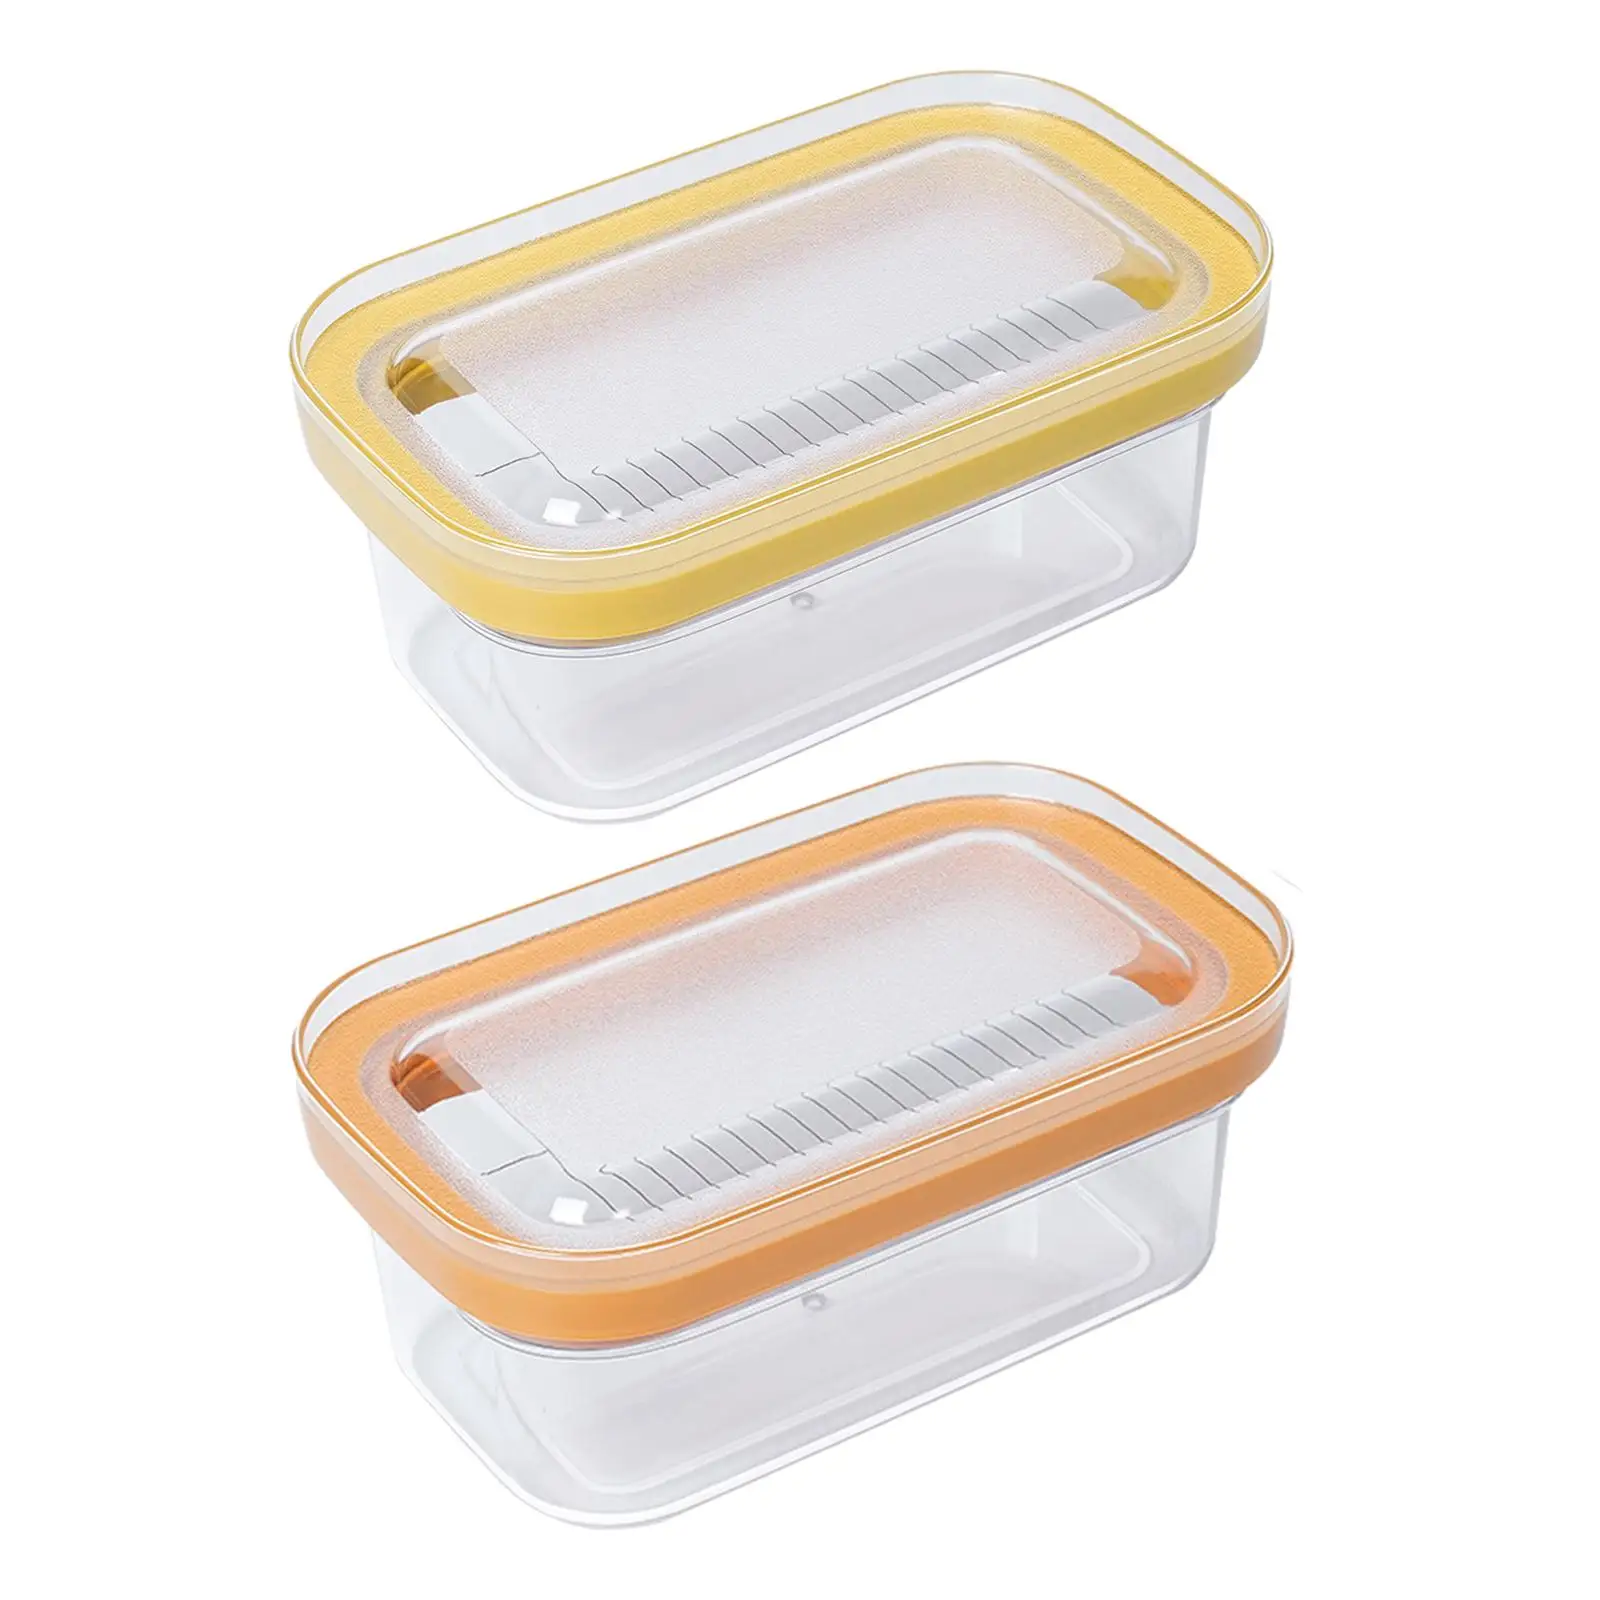 Butter Cutting Storage Box Butter Keeper with Cutter Rectangle Sealing Butter Dish for Countertop Kitchen Home Baking